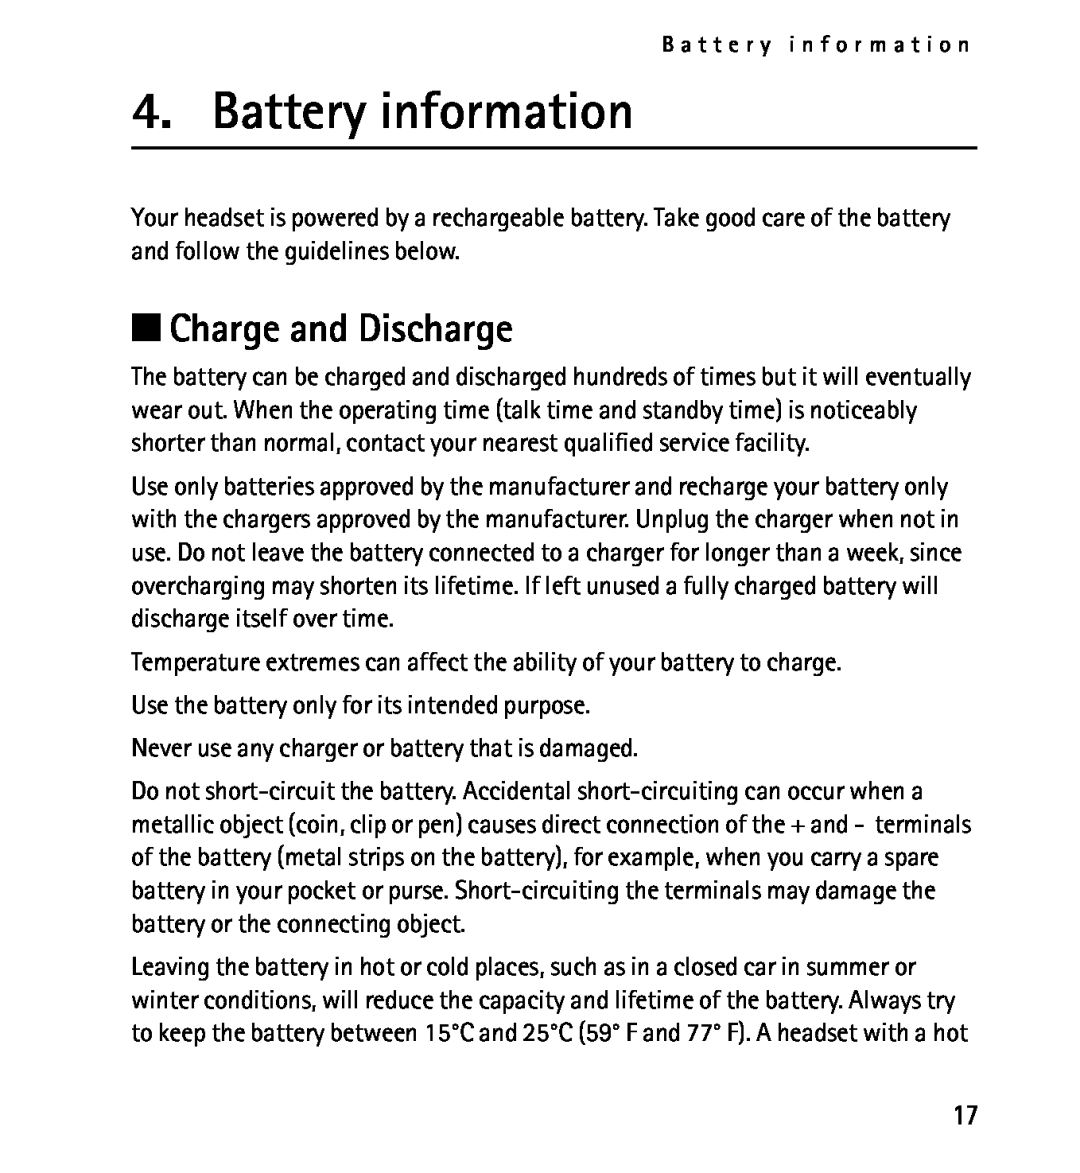 Nokia 9232254 manual Battery information, Charge and Discharge, B a t t e r y i n f o r m a t i o n 